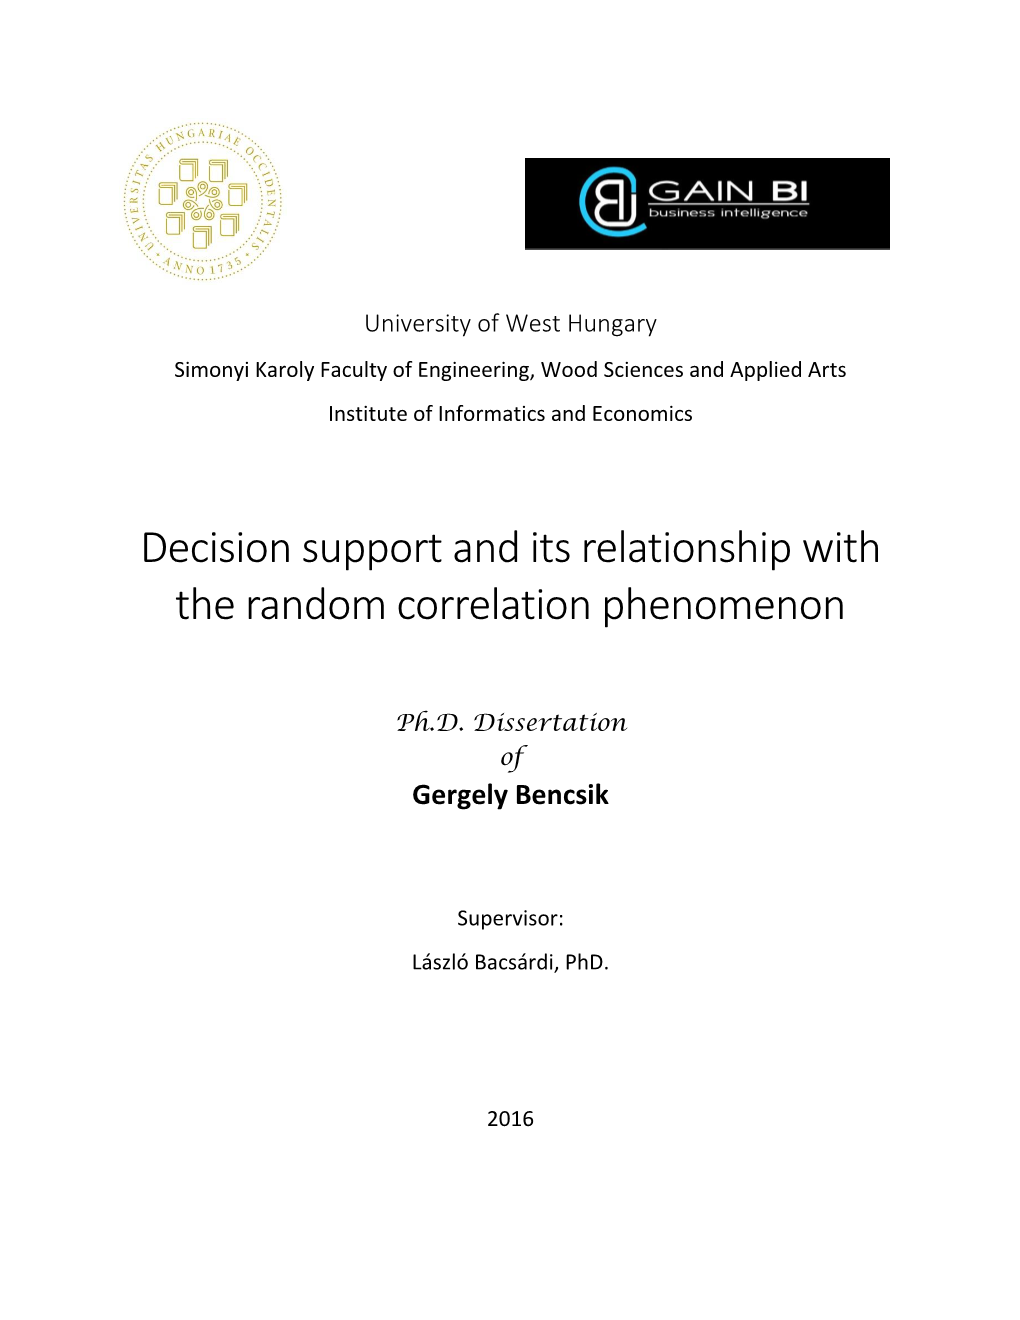 Decision Support and Its Relationship with the Random Correlation Phenomenon